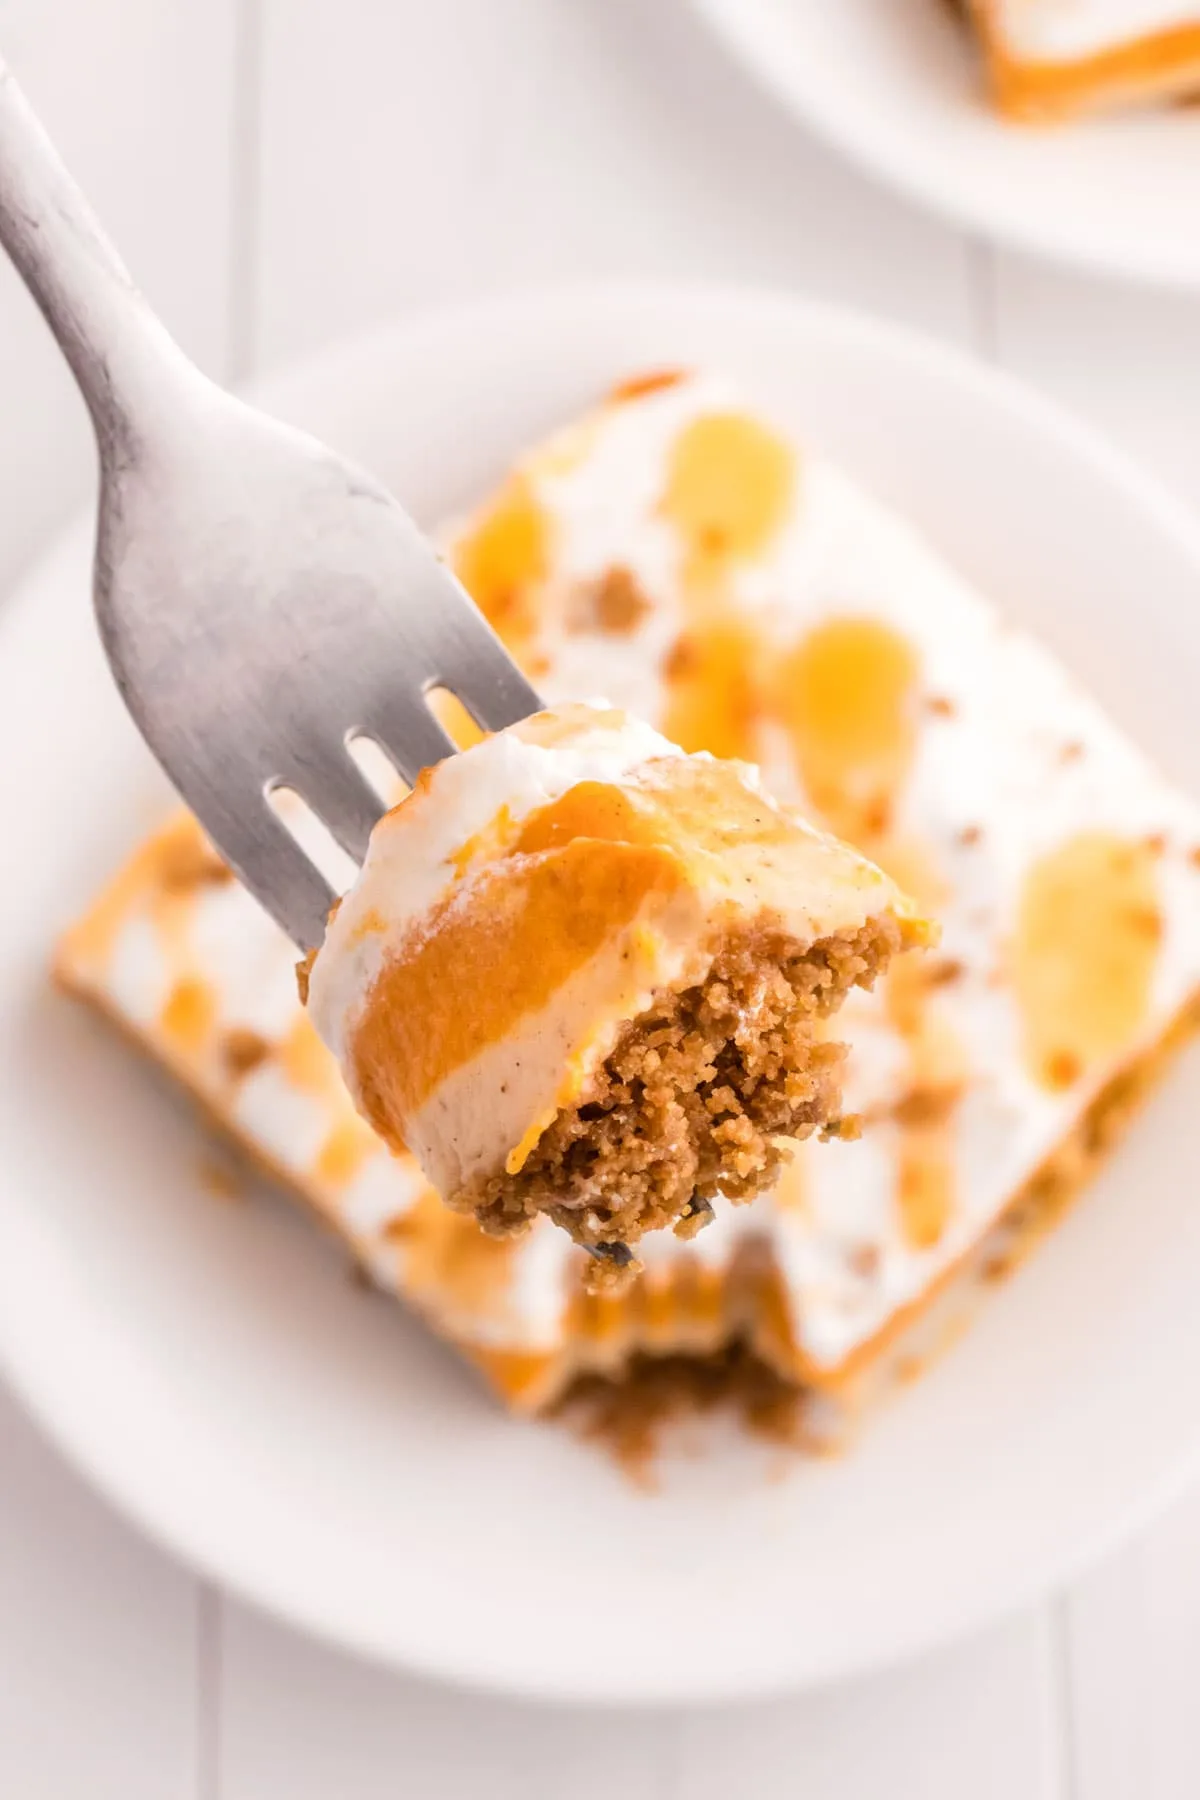 Pumpkin Delight is a rich and creamy dessert with layers of whipped topping, pumpkin pudding mousse mixture, cinnamon cheesecake and a gingersnap cookie crust.